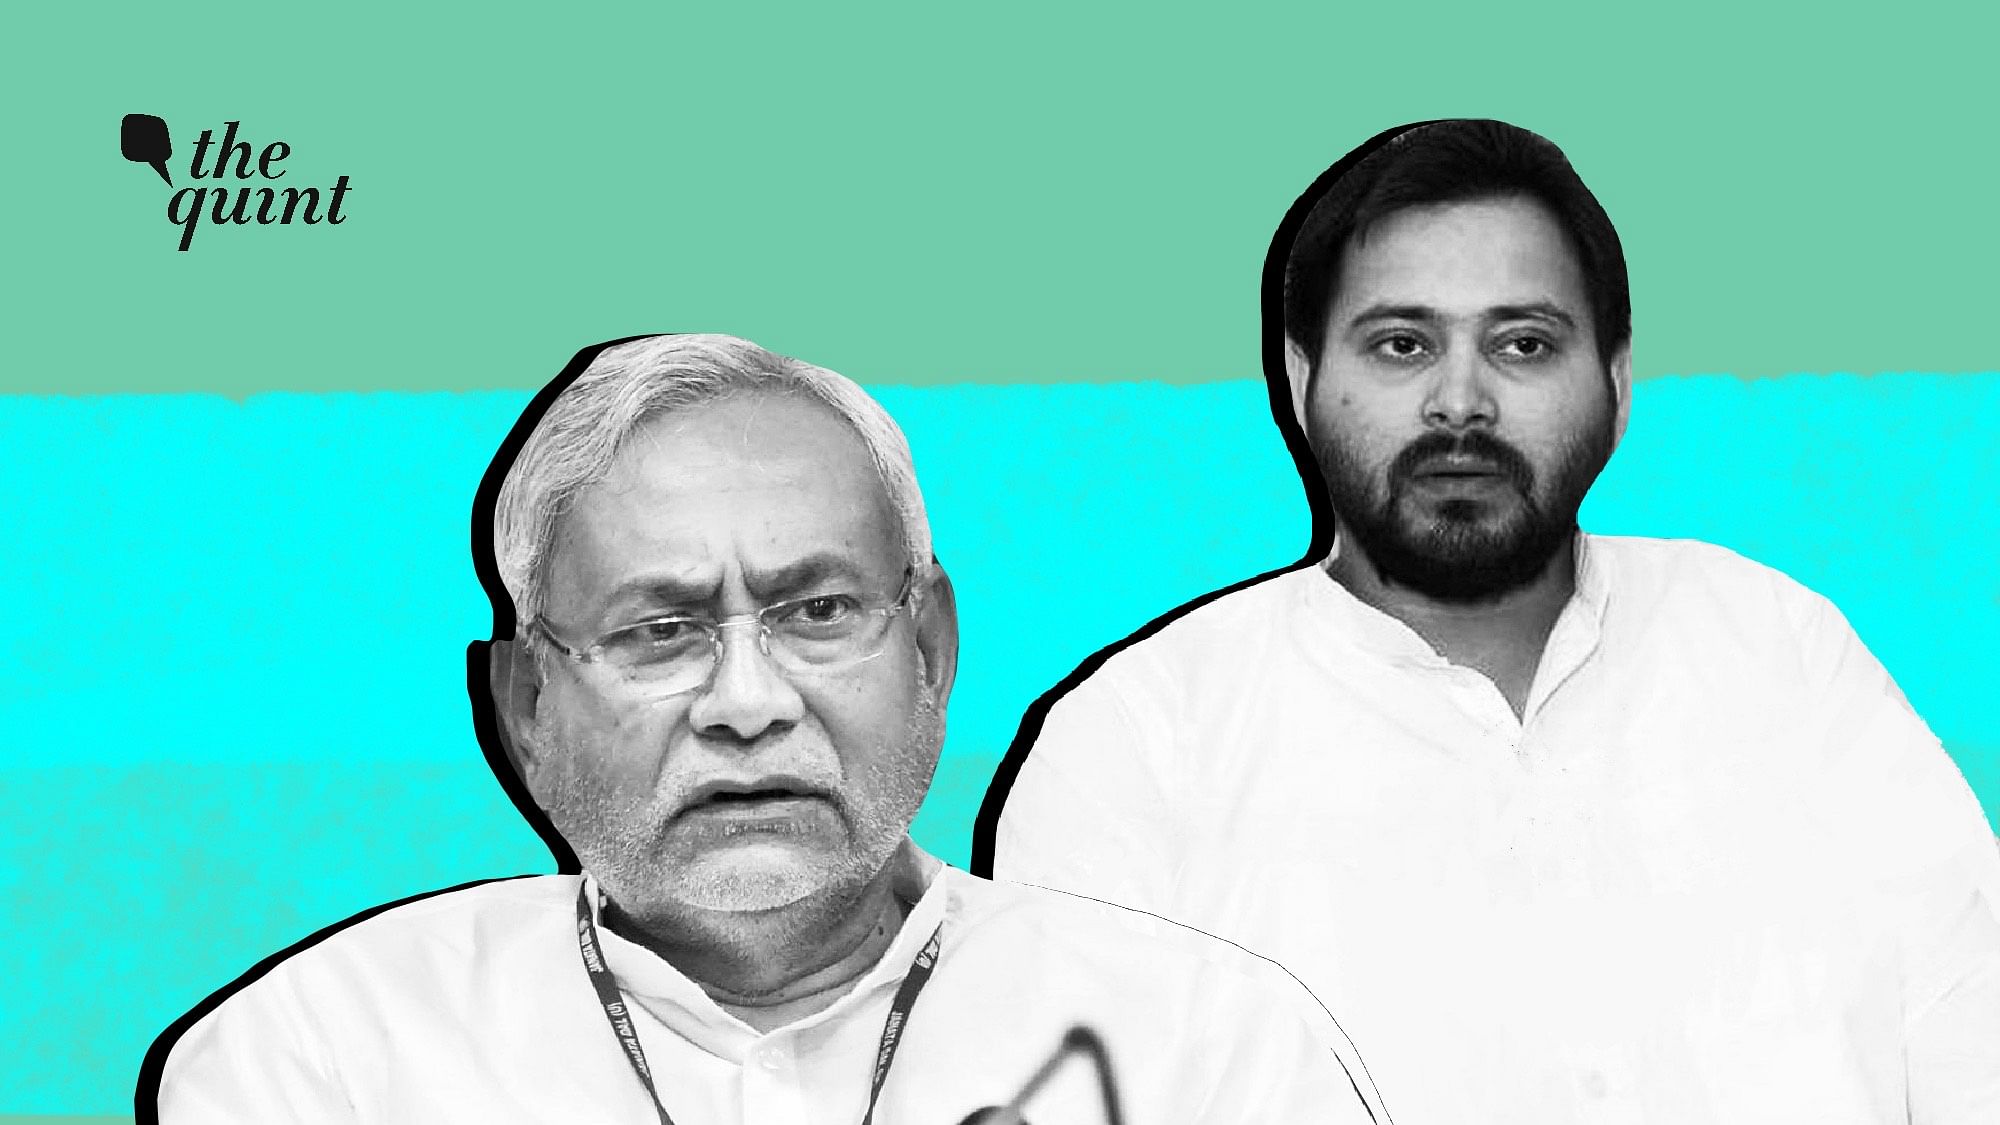 The Lokniti-CSDS Bihar Opinion Poll, released on Tuesday, 20 October, ahead of the Bihar Assembly elections, has indicated that Bihar CM Nitish Kumar’s popularity has taken a hit, reported India Today.